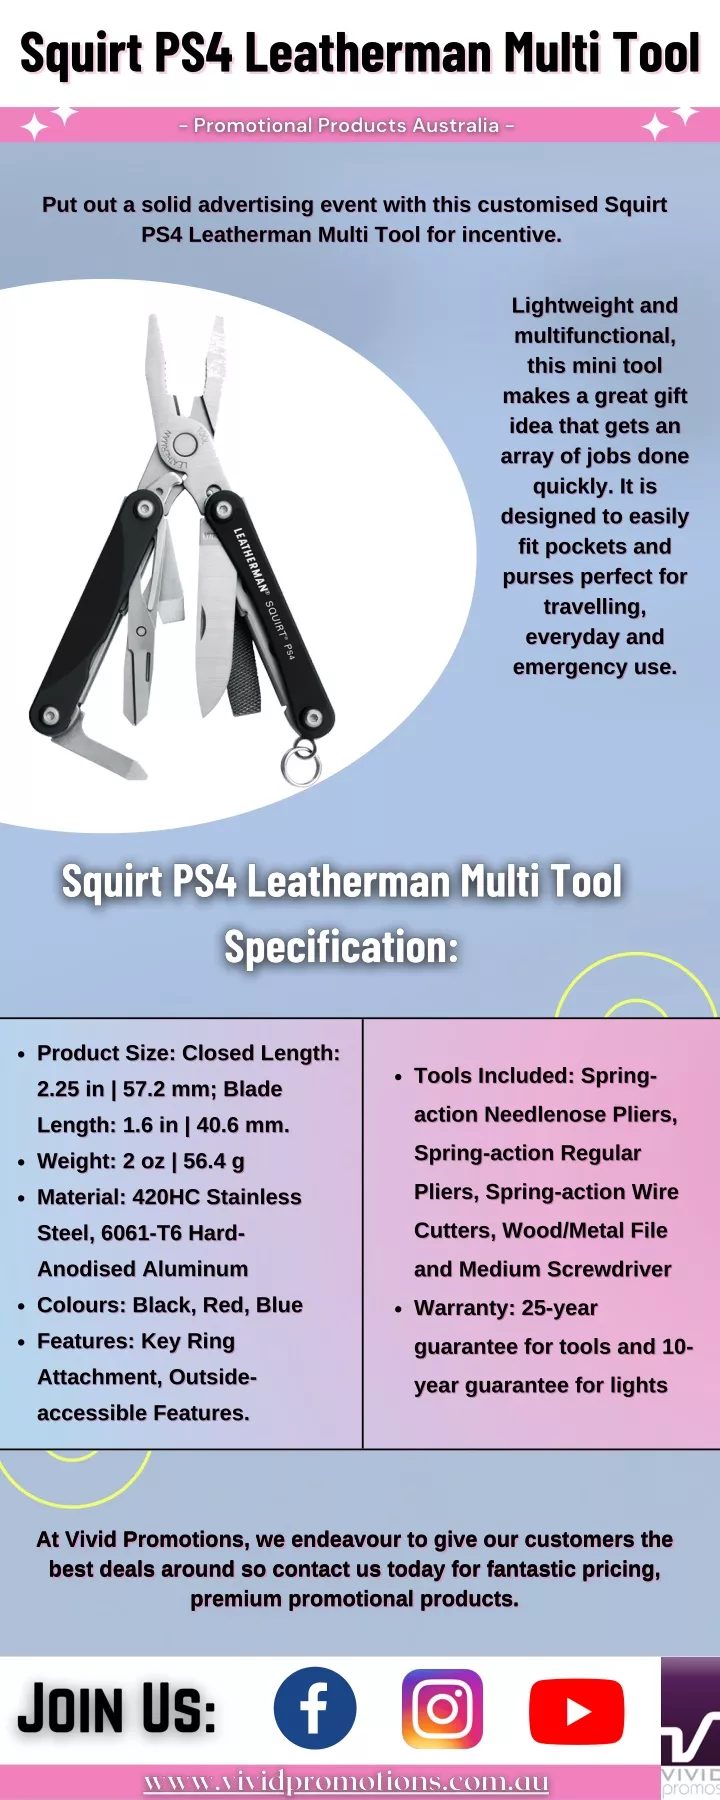 squirt ps4 leatherman multi tool squirt